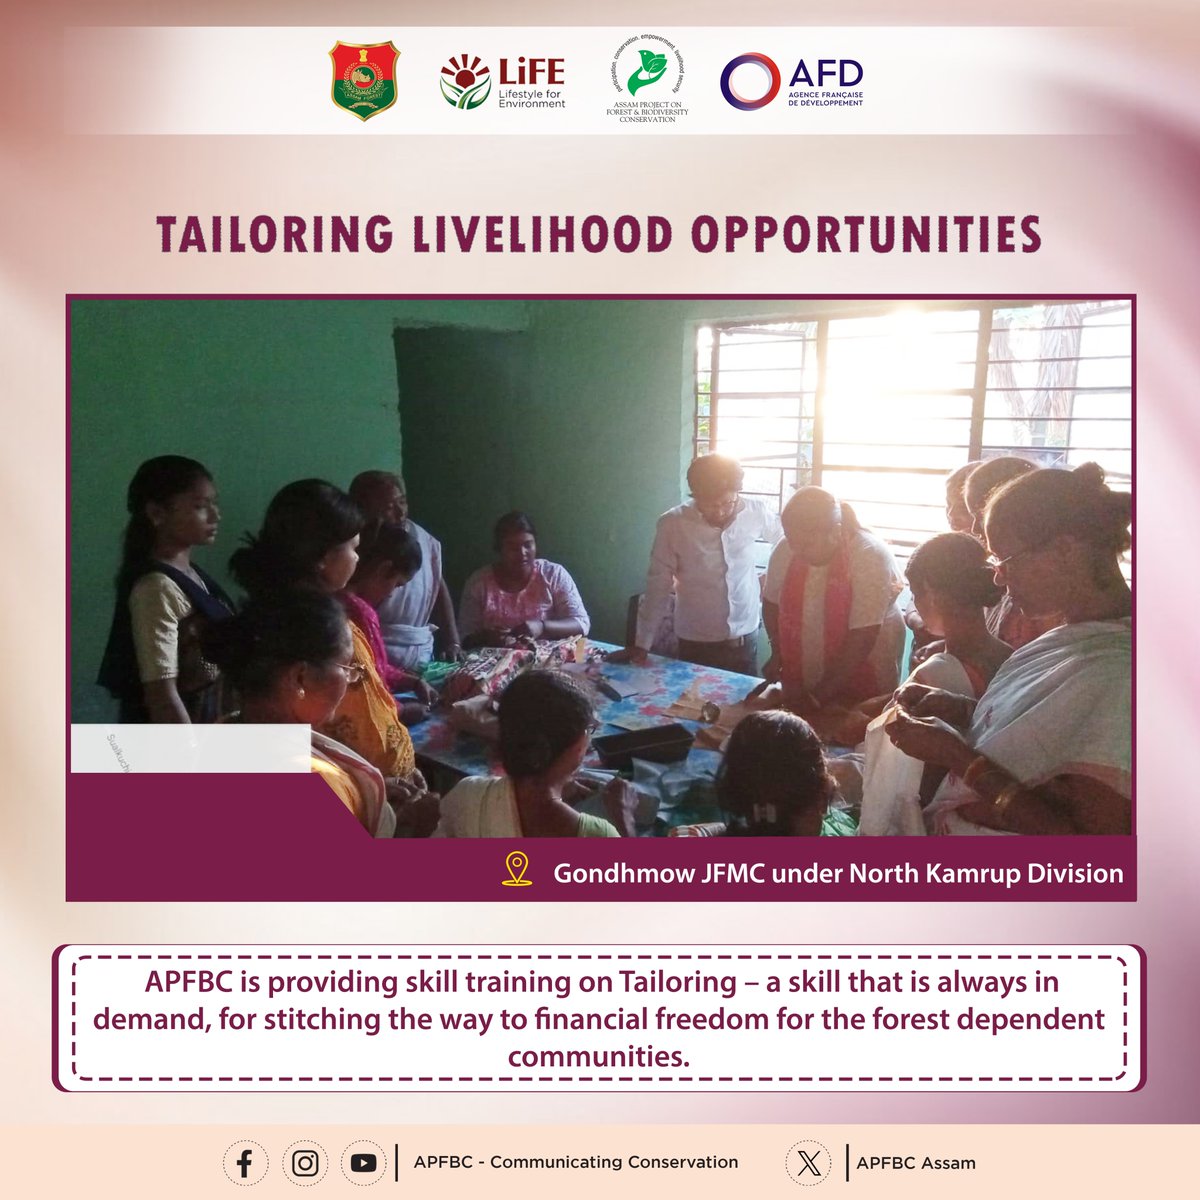 Empowering forest fringe communities with the art of tailoring. APFBC's specialized training to stitch together a brighter future, one community at a time.

#CommunityEmpowerment
#skilltraining
#CommunityEngagement 

@AFD_en
@assamforest
@ksandeep005
@diprassam
@mygovassam